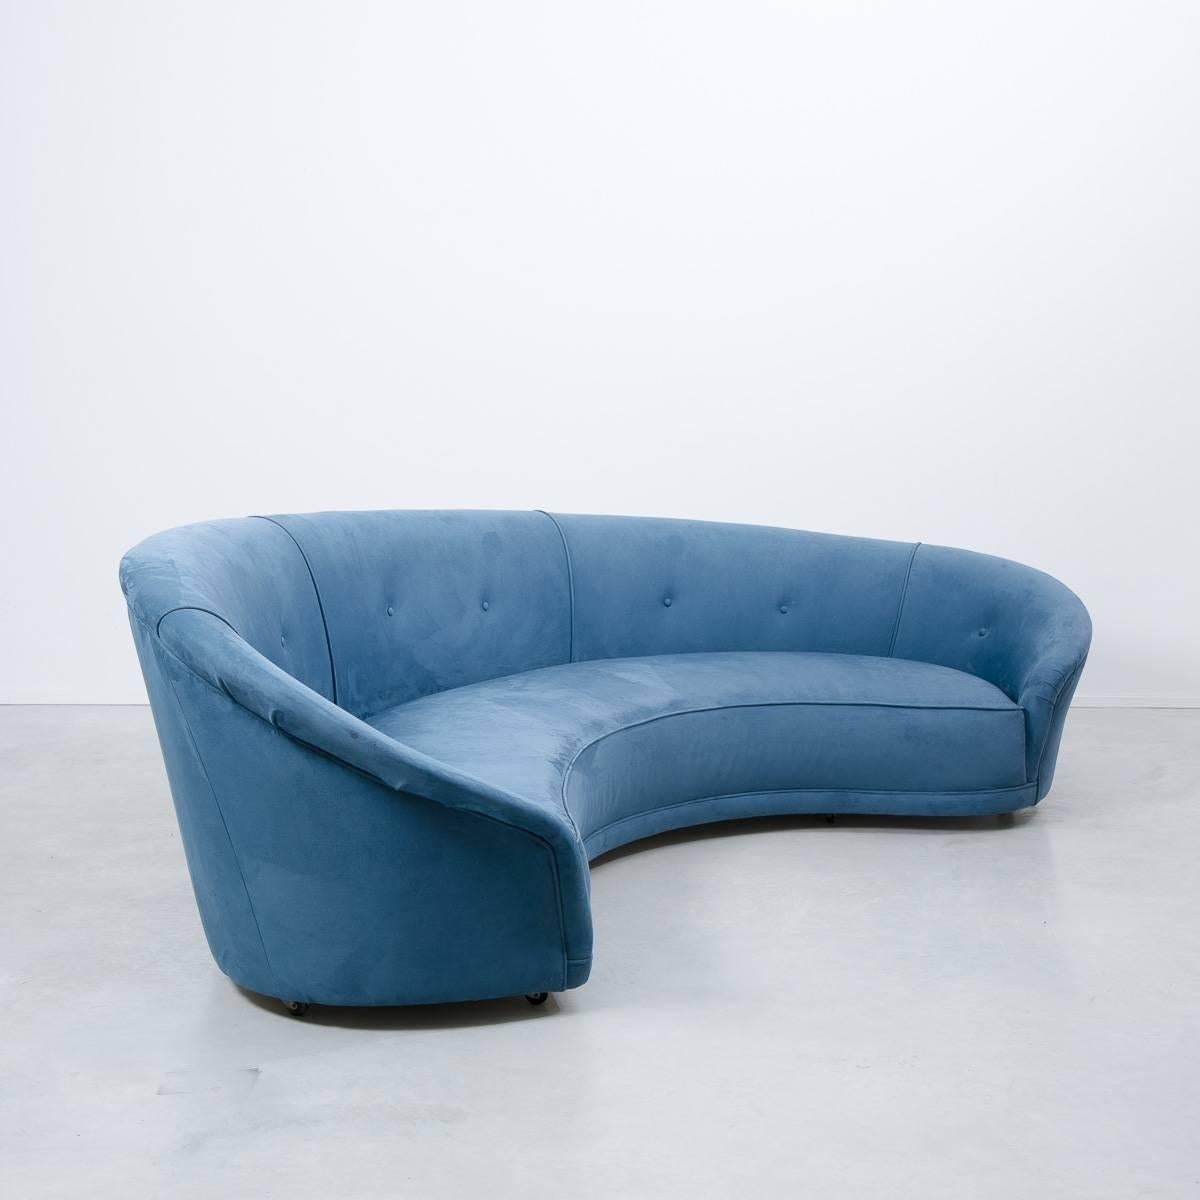 70s curved sofa